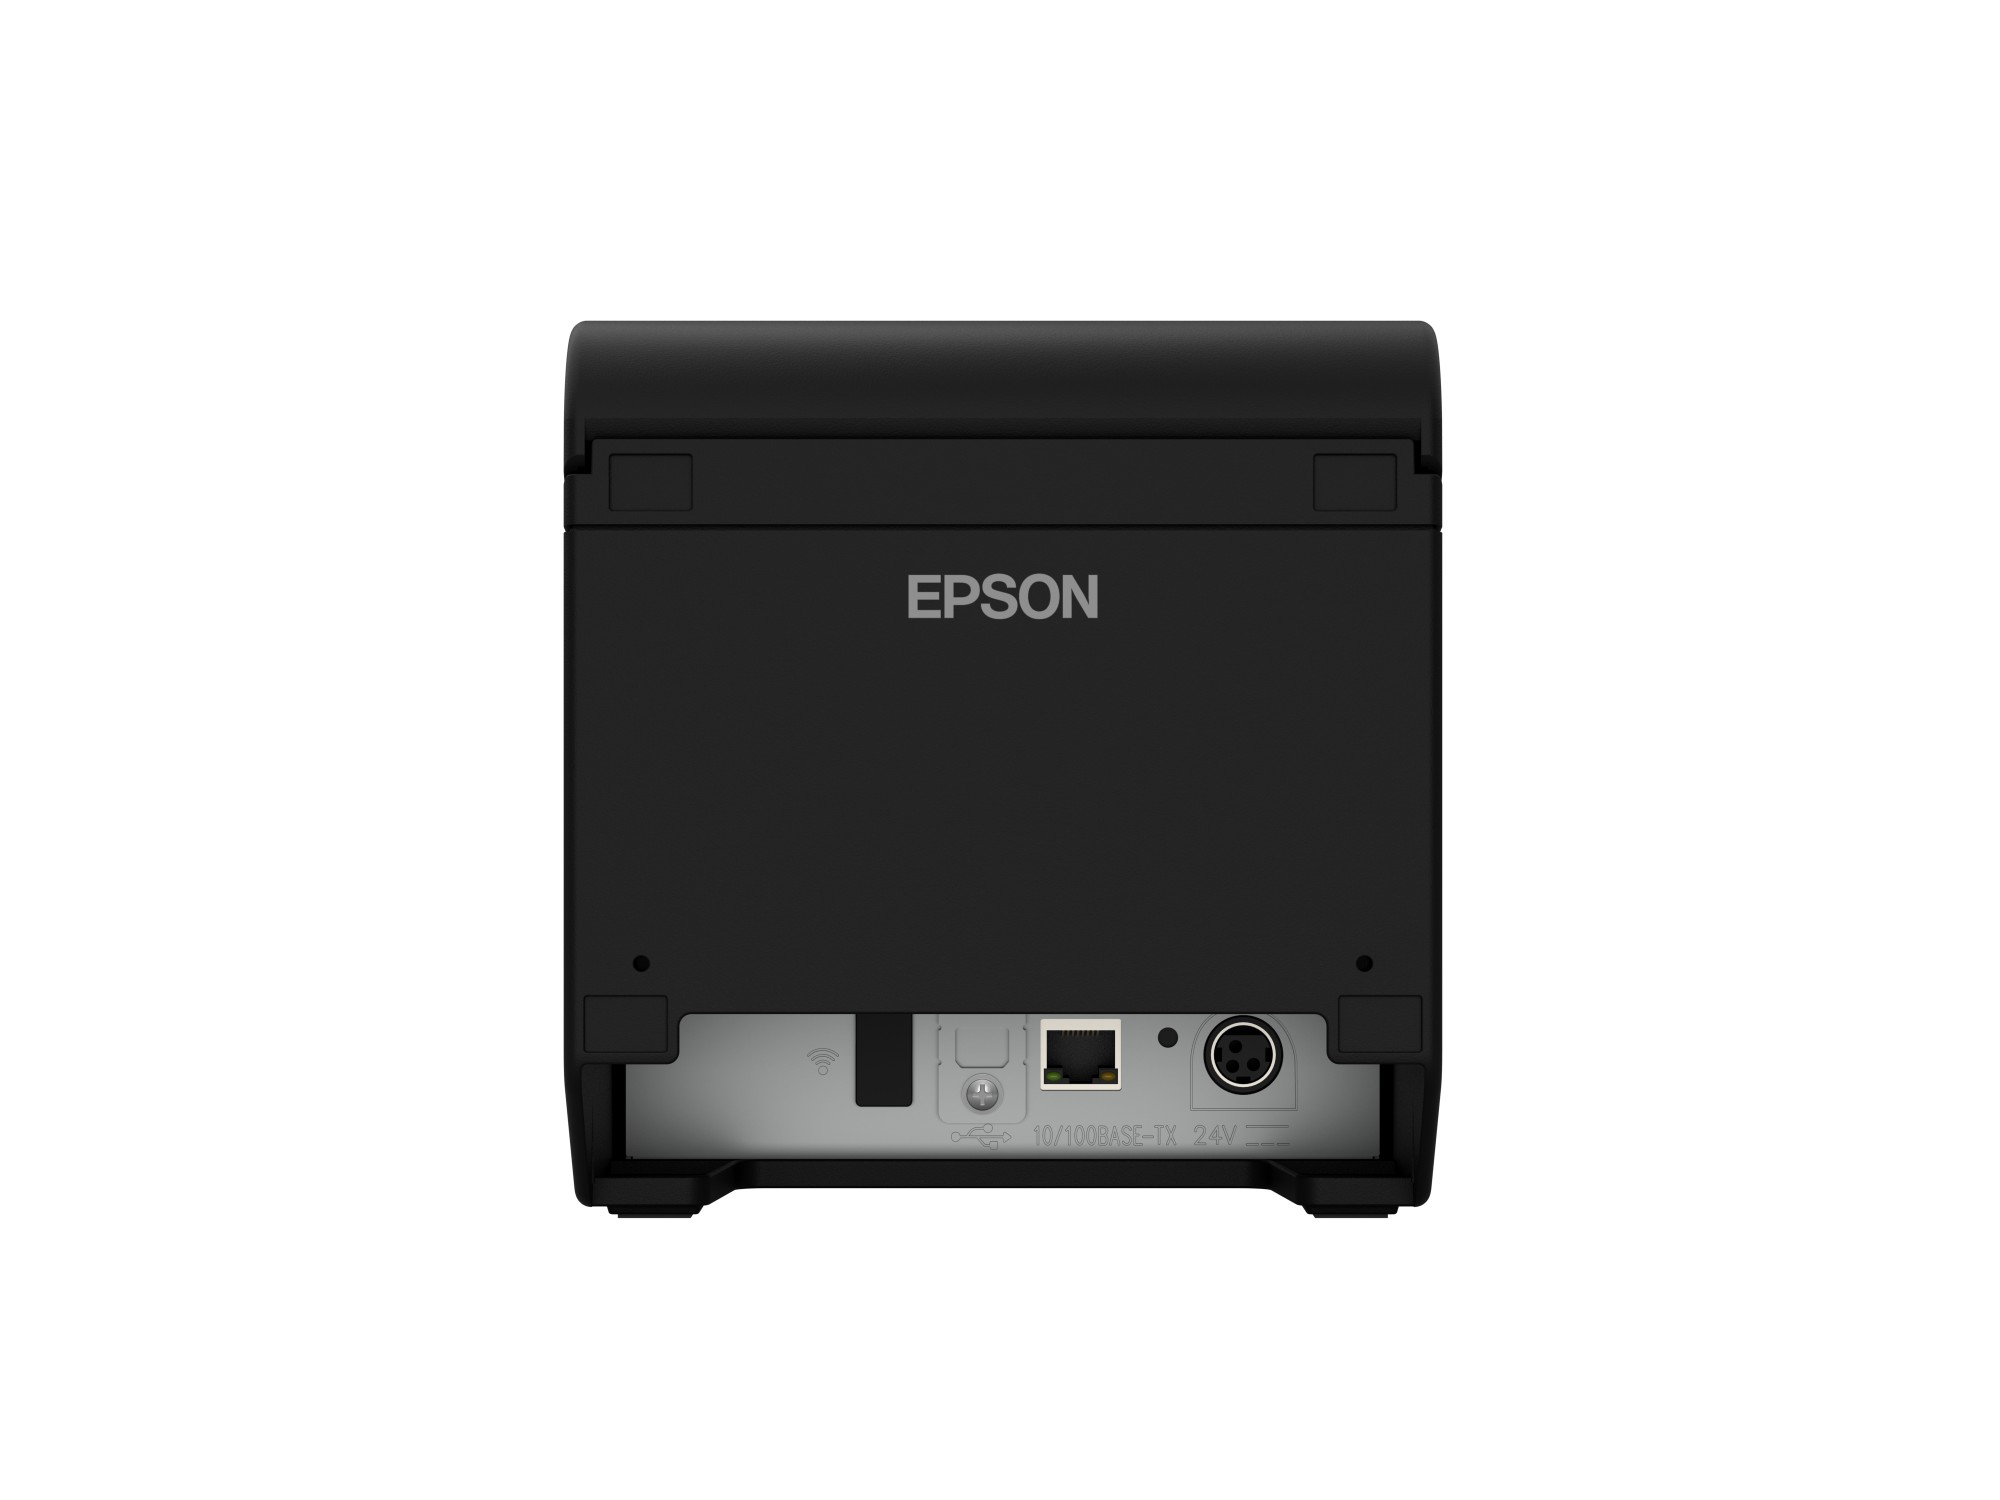 Epson TM-T20III (011A0) Thermal POS printer 203 x 203 DPI Wired